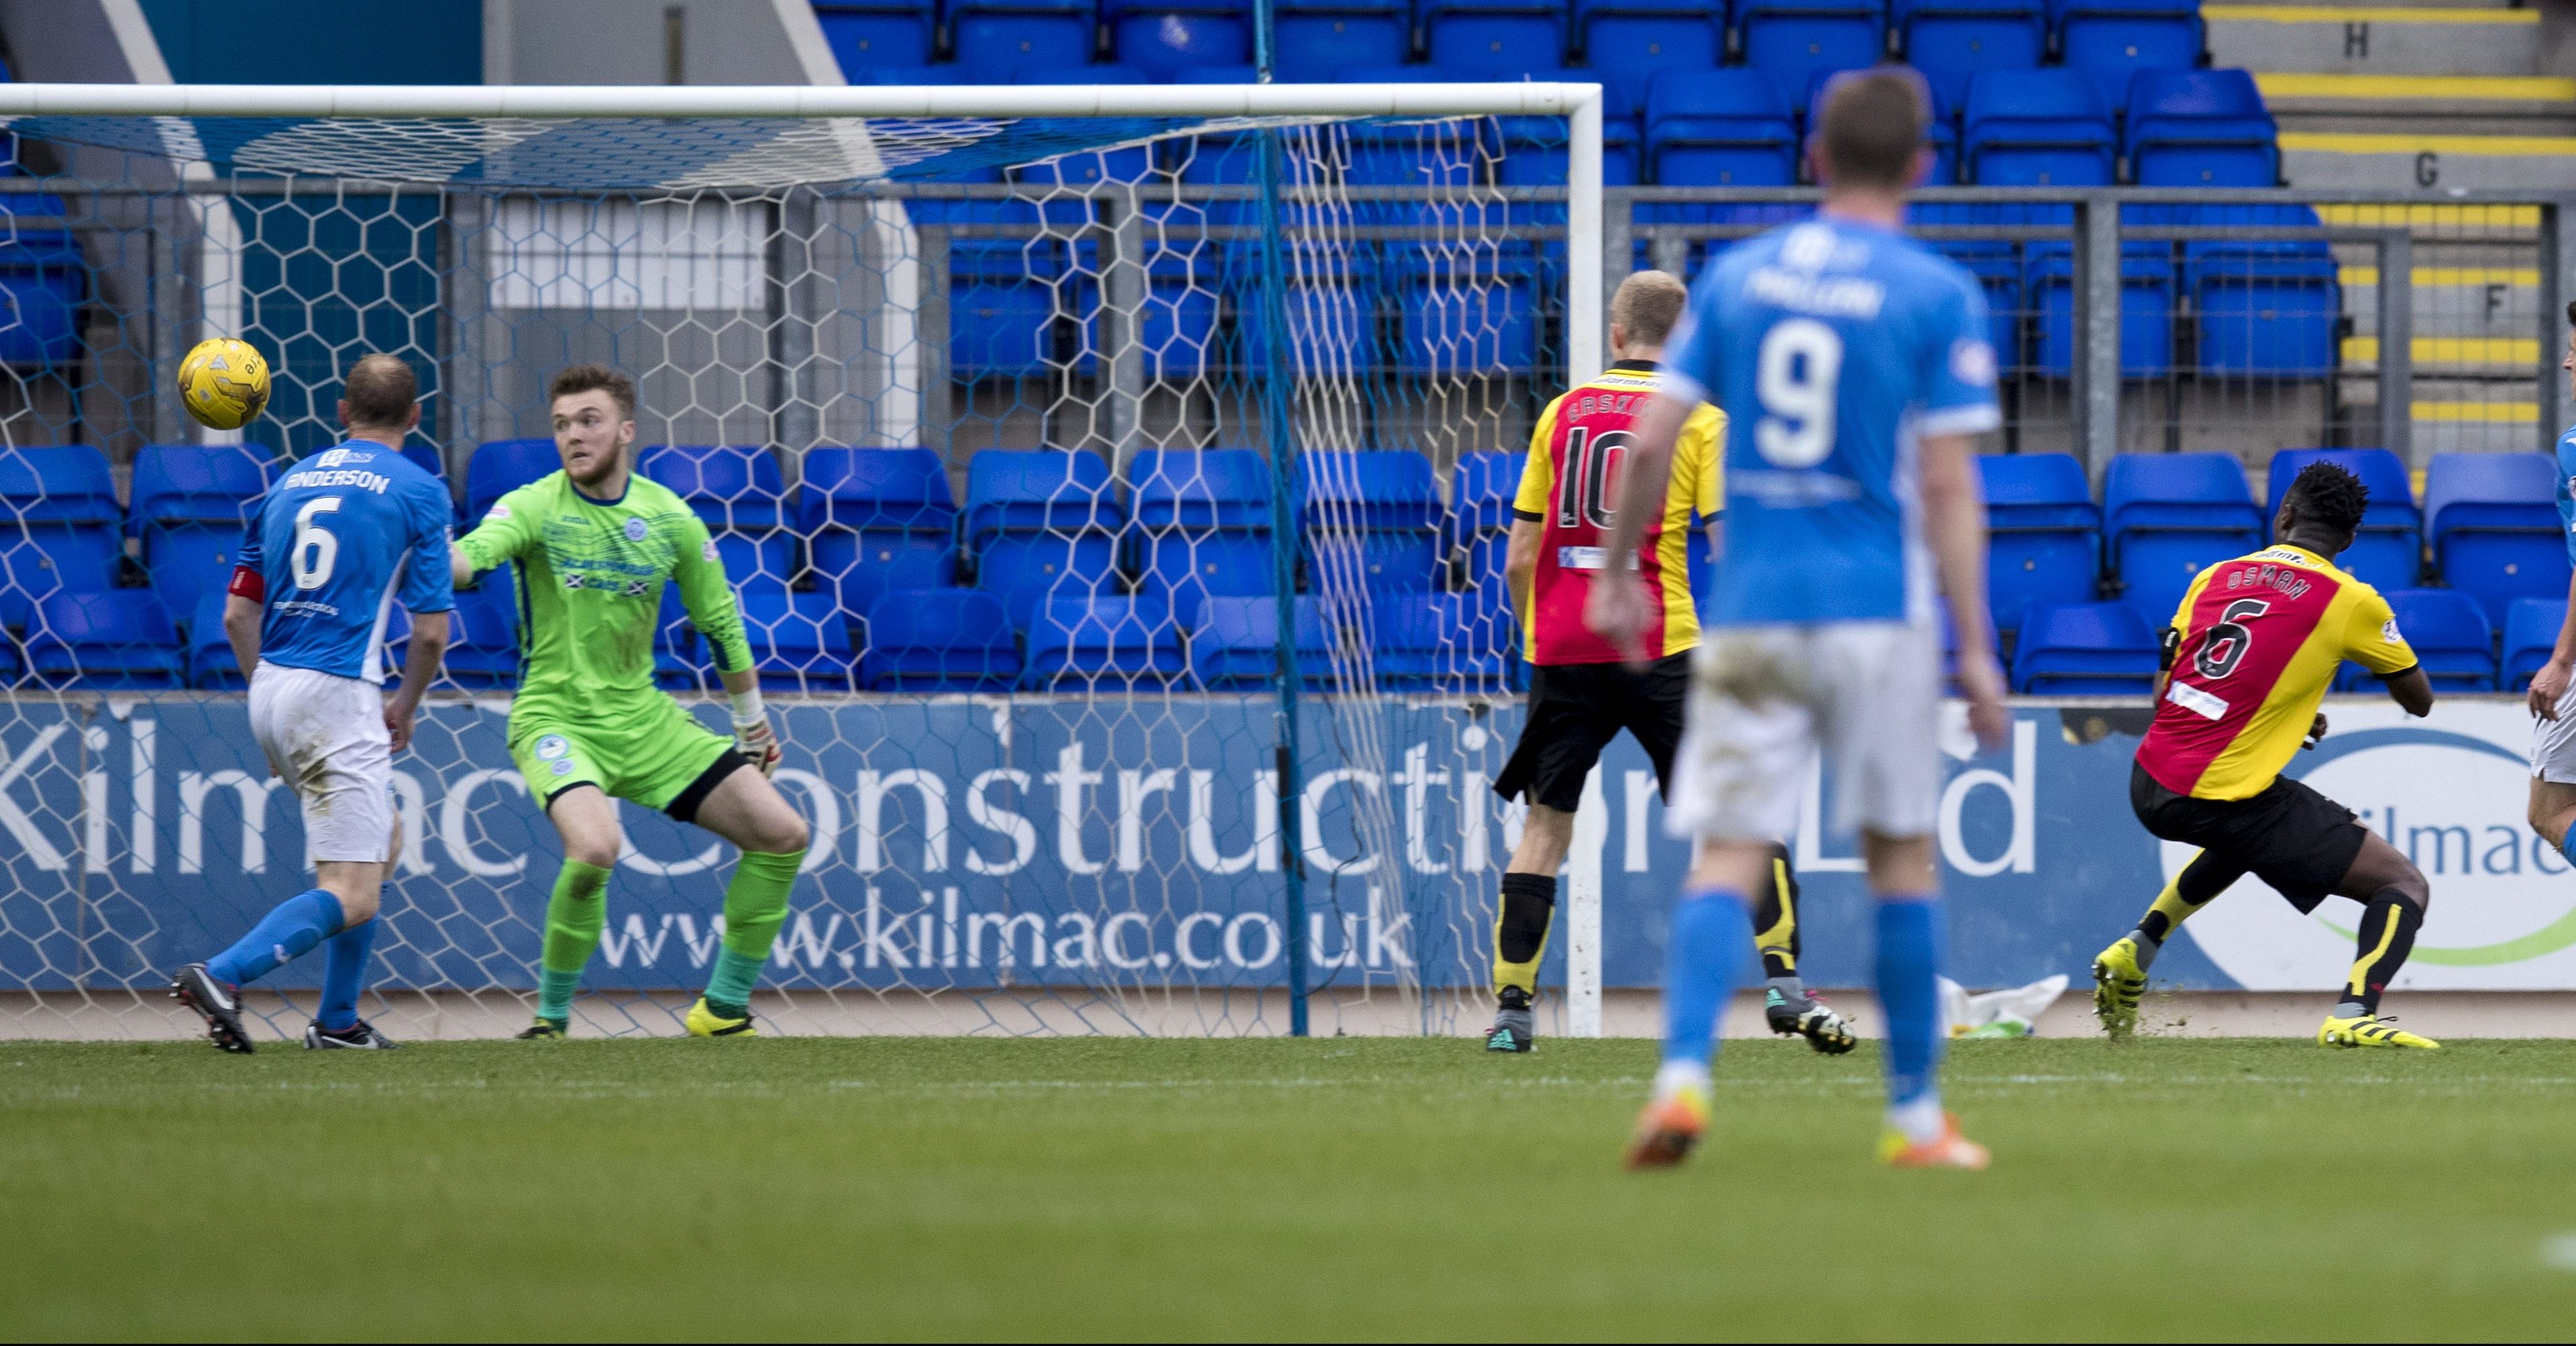 Saints concede a late goal to Partick Thistle.